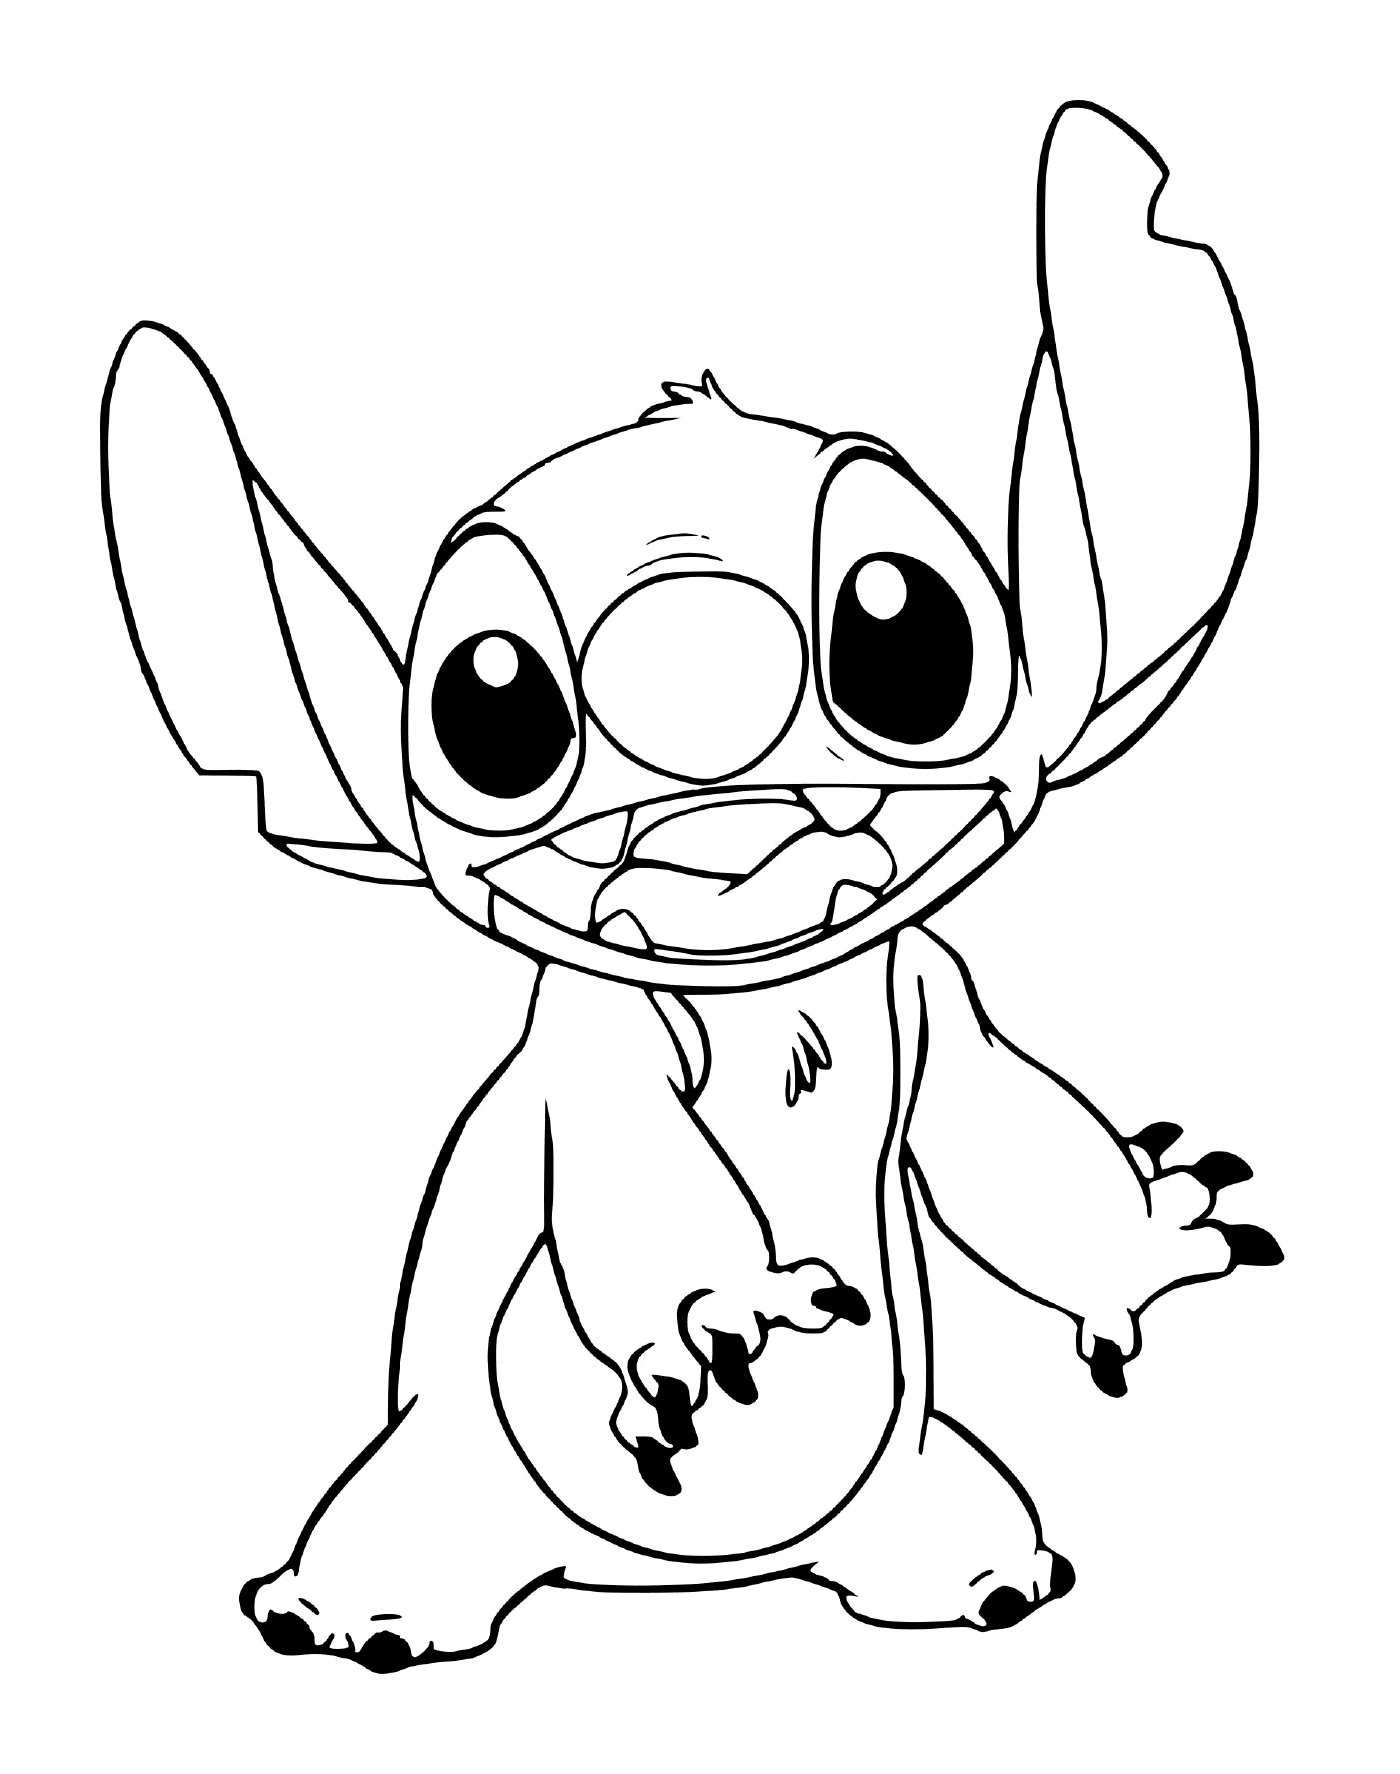  Image of Stitch in drawing 